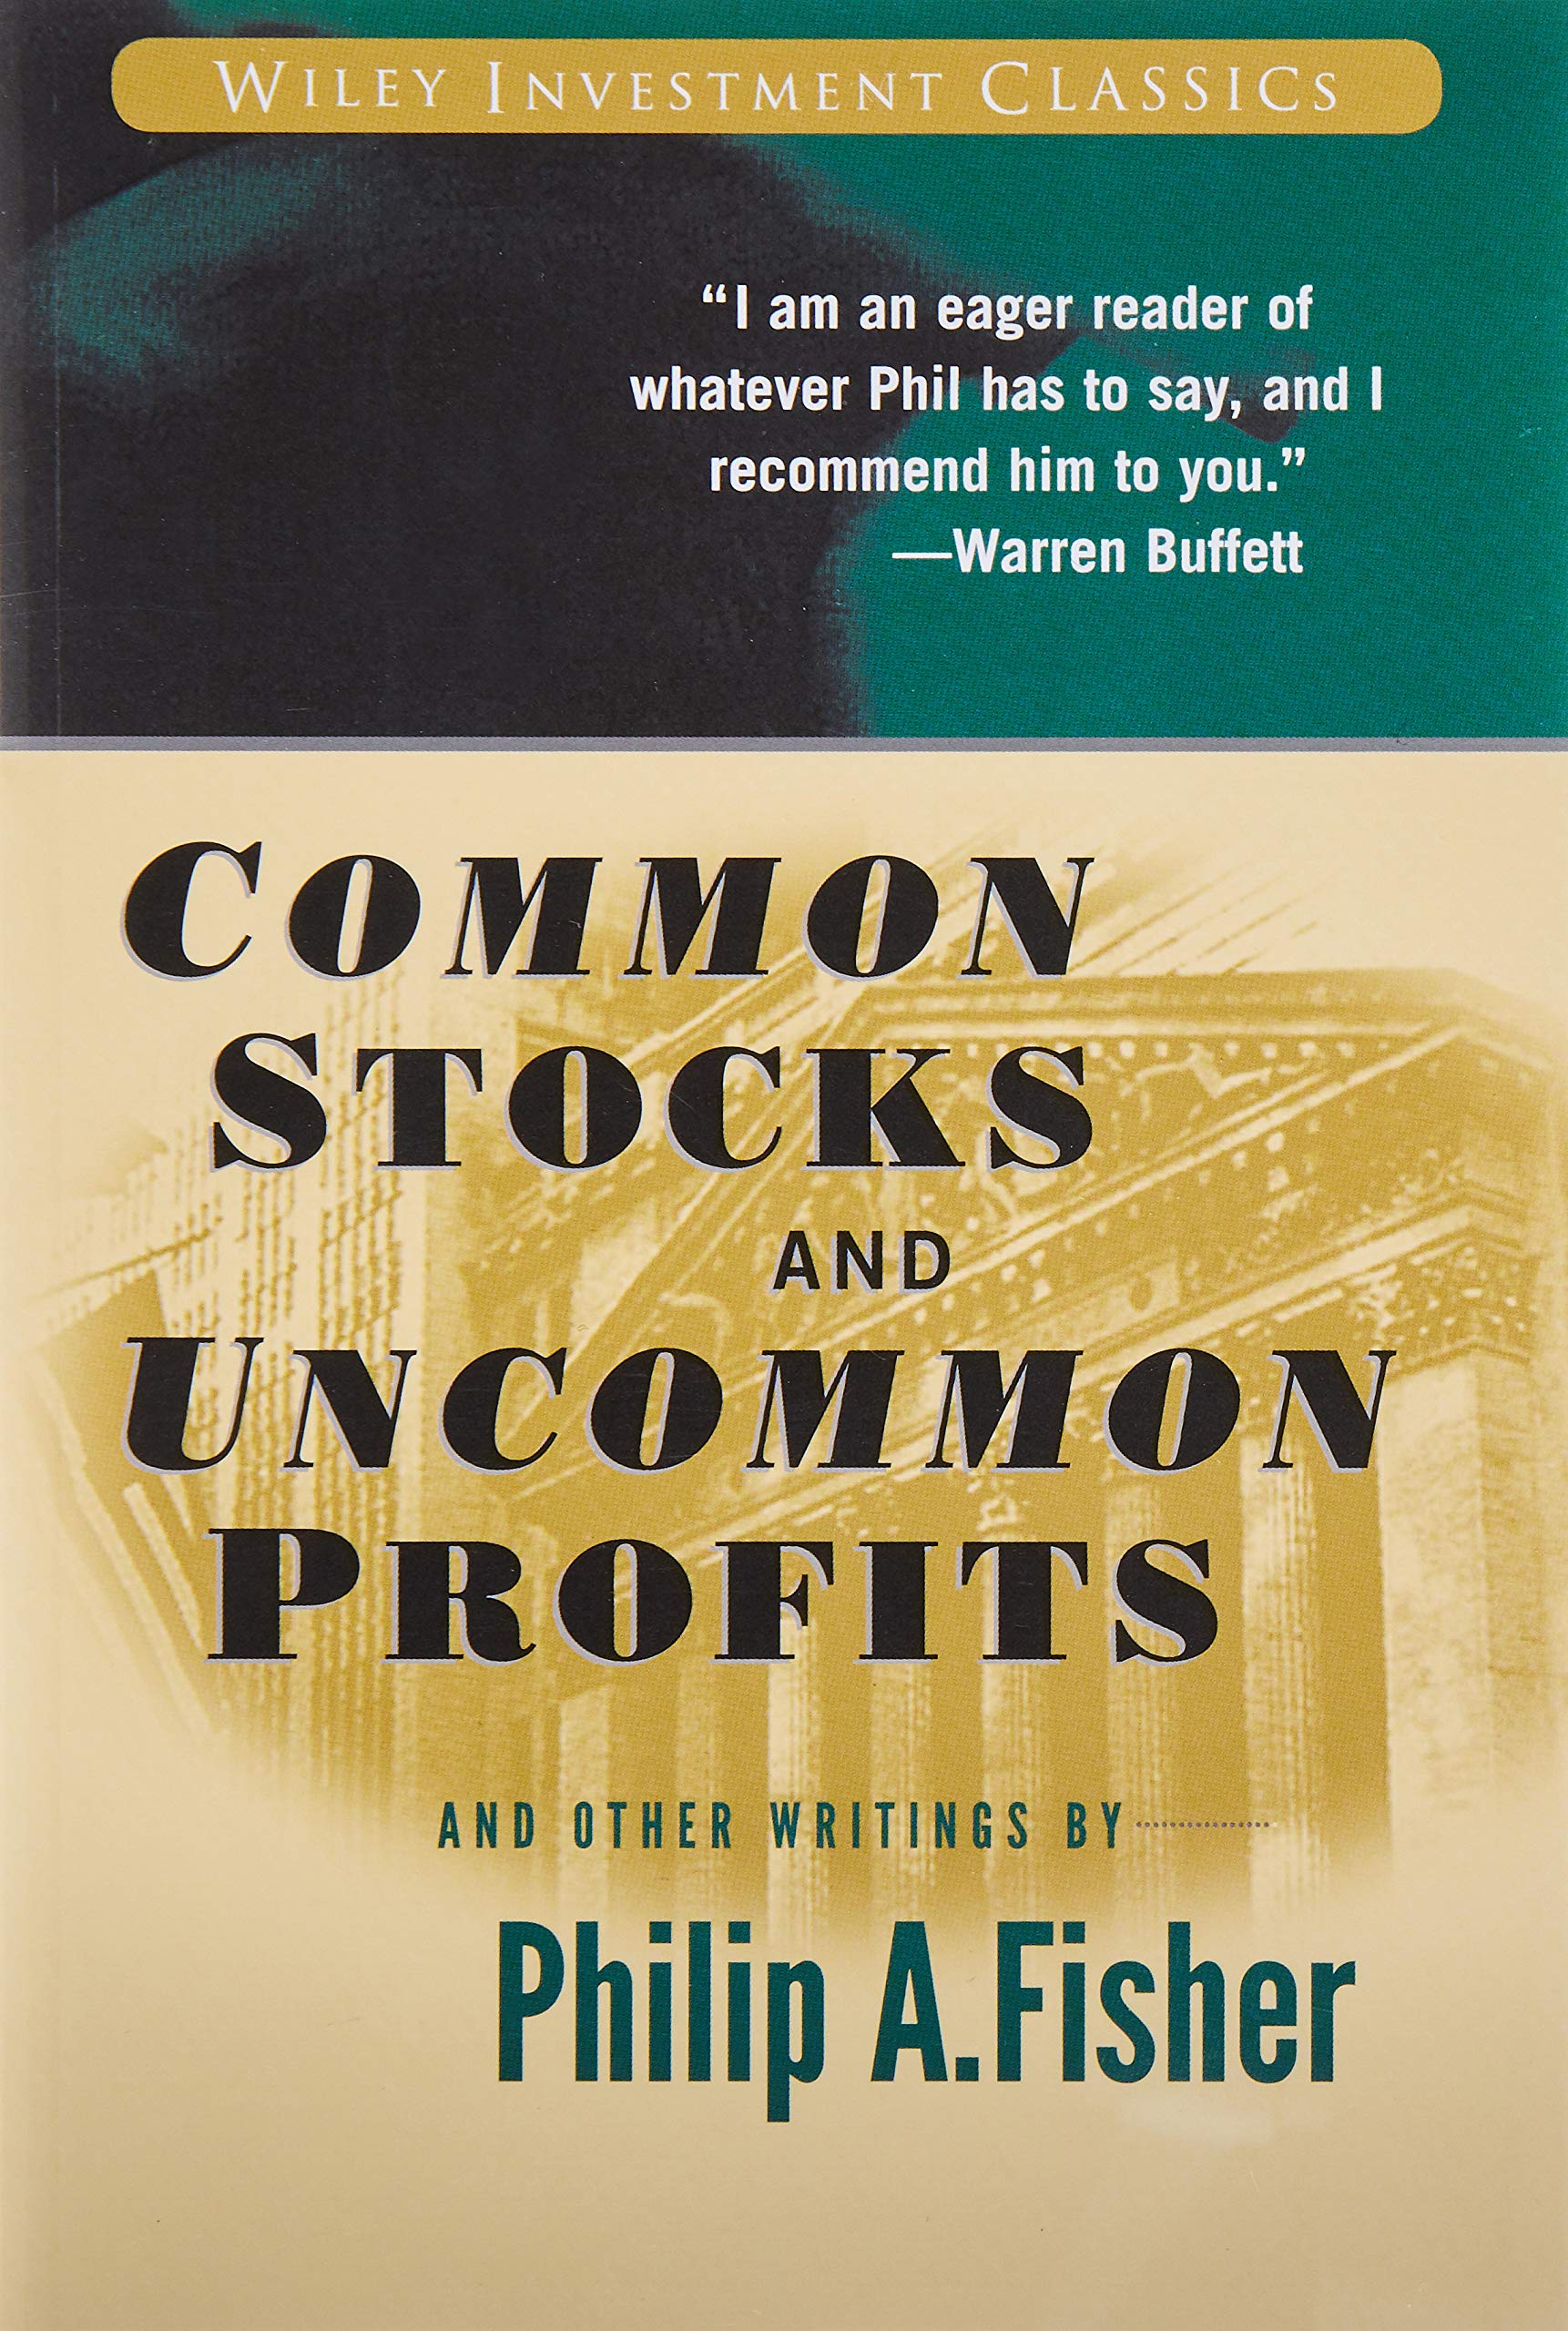 Common Stocks and Uncommon Profits and Other Writings By Philip A. Fisher